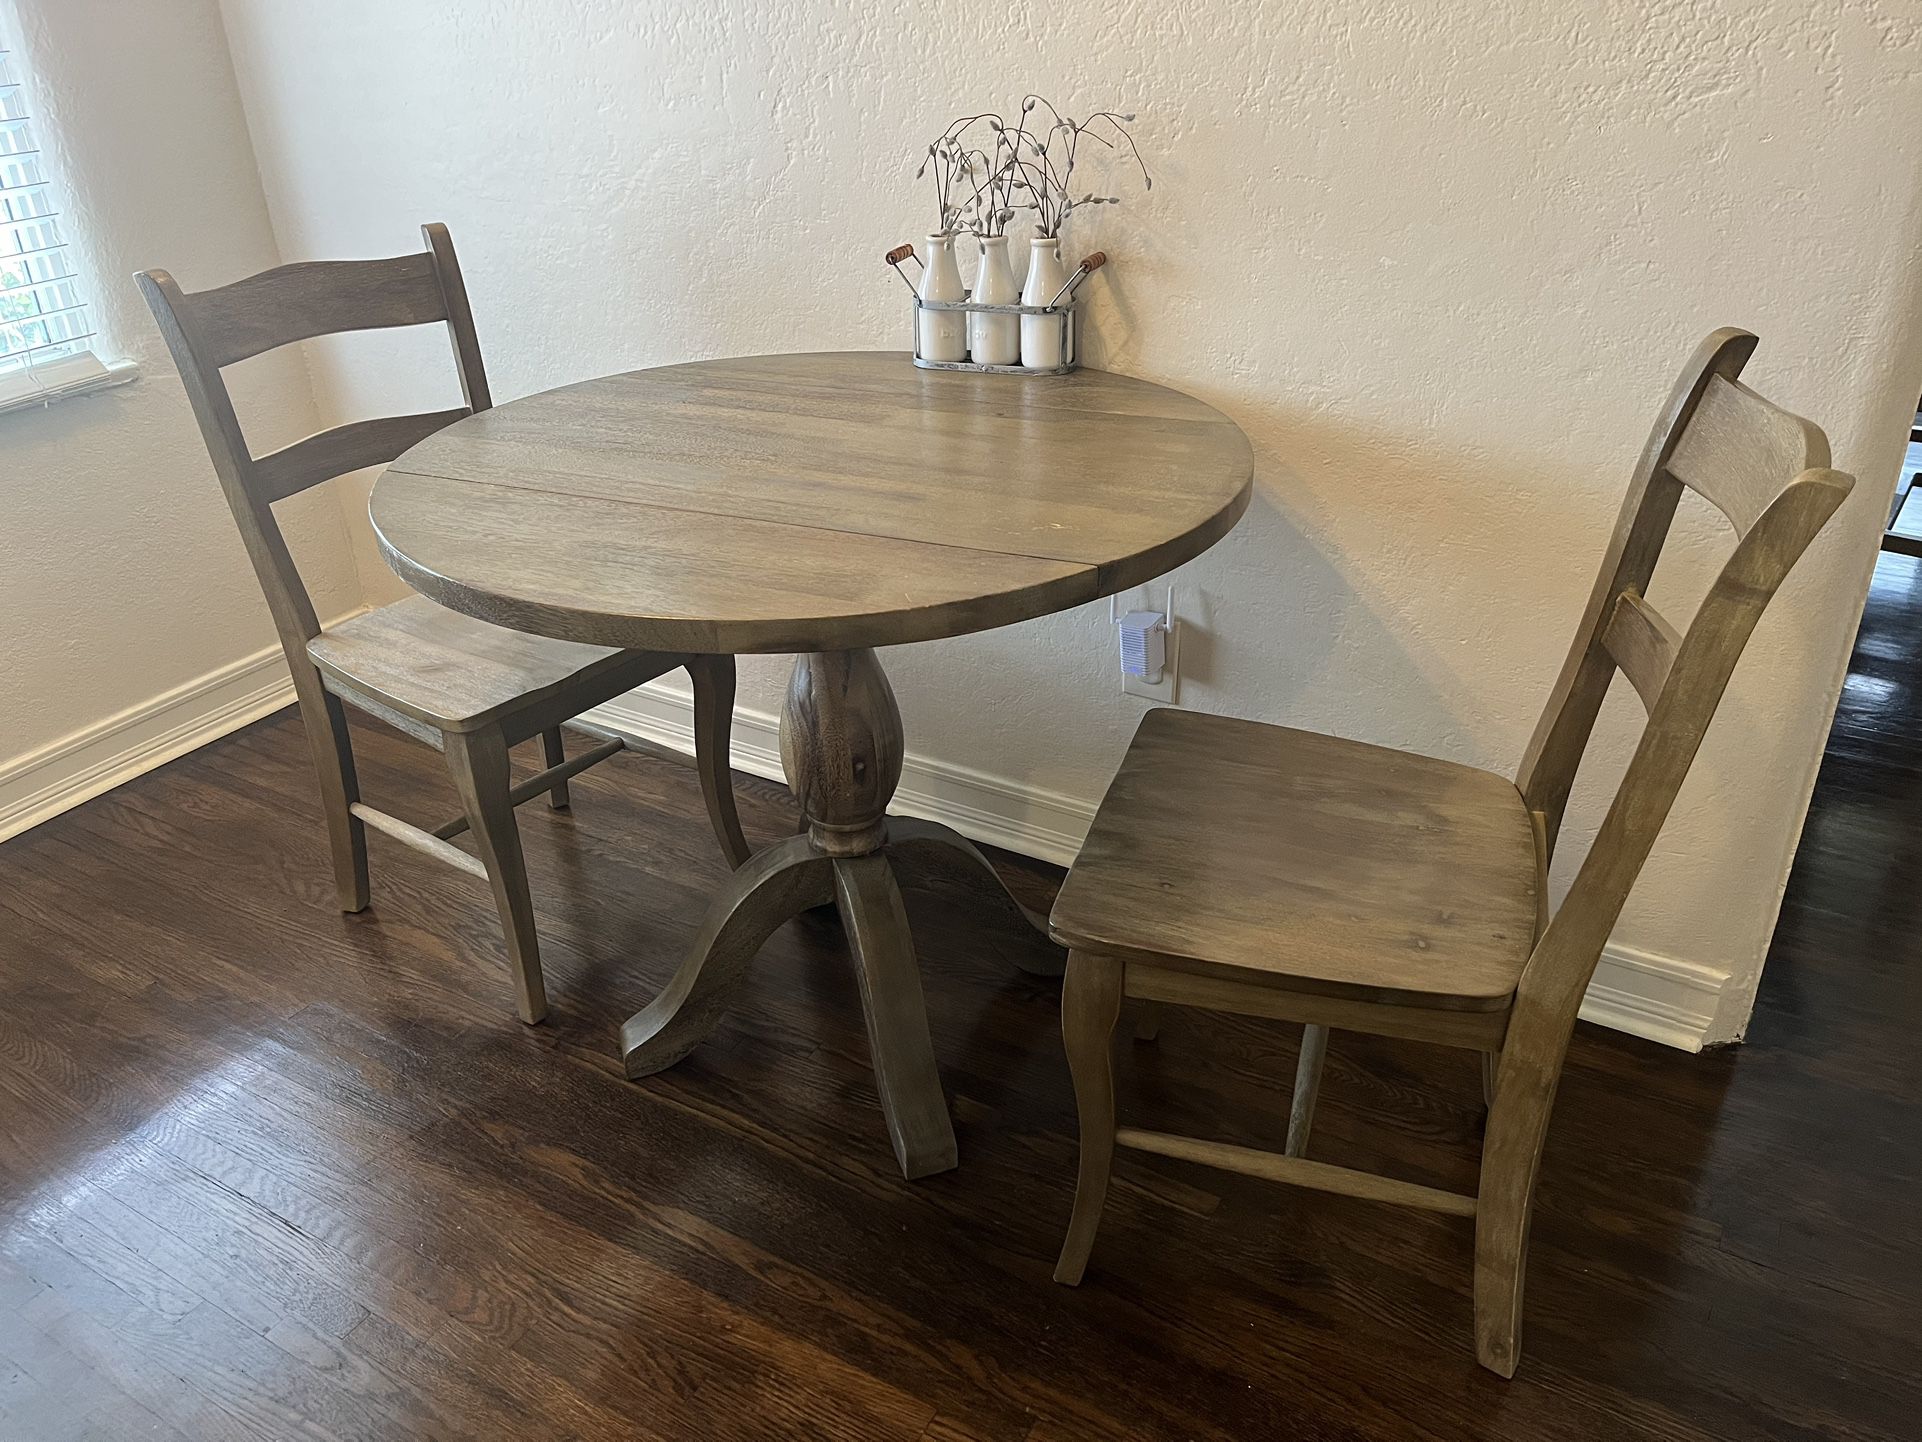 Wooden Kitchen Table & 2 Chairs